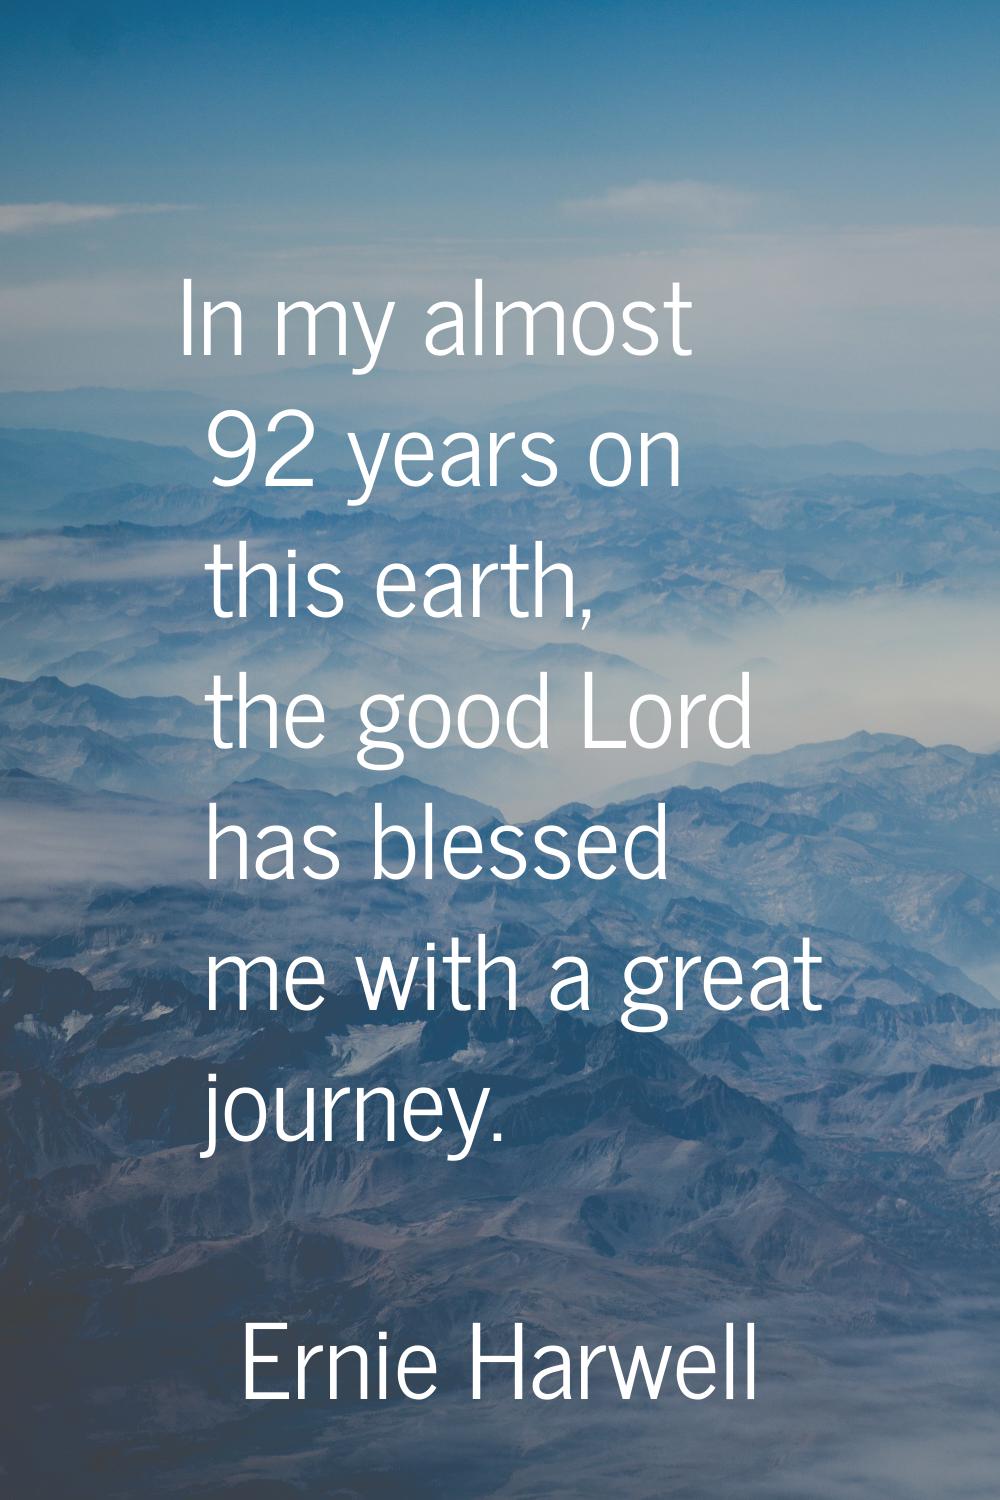 In my almost 92 years on this earth, the good Lord has blessed me with a great journey.